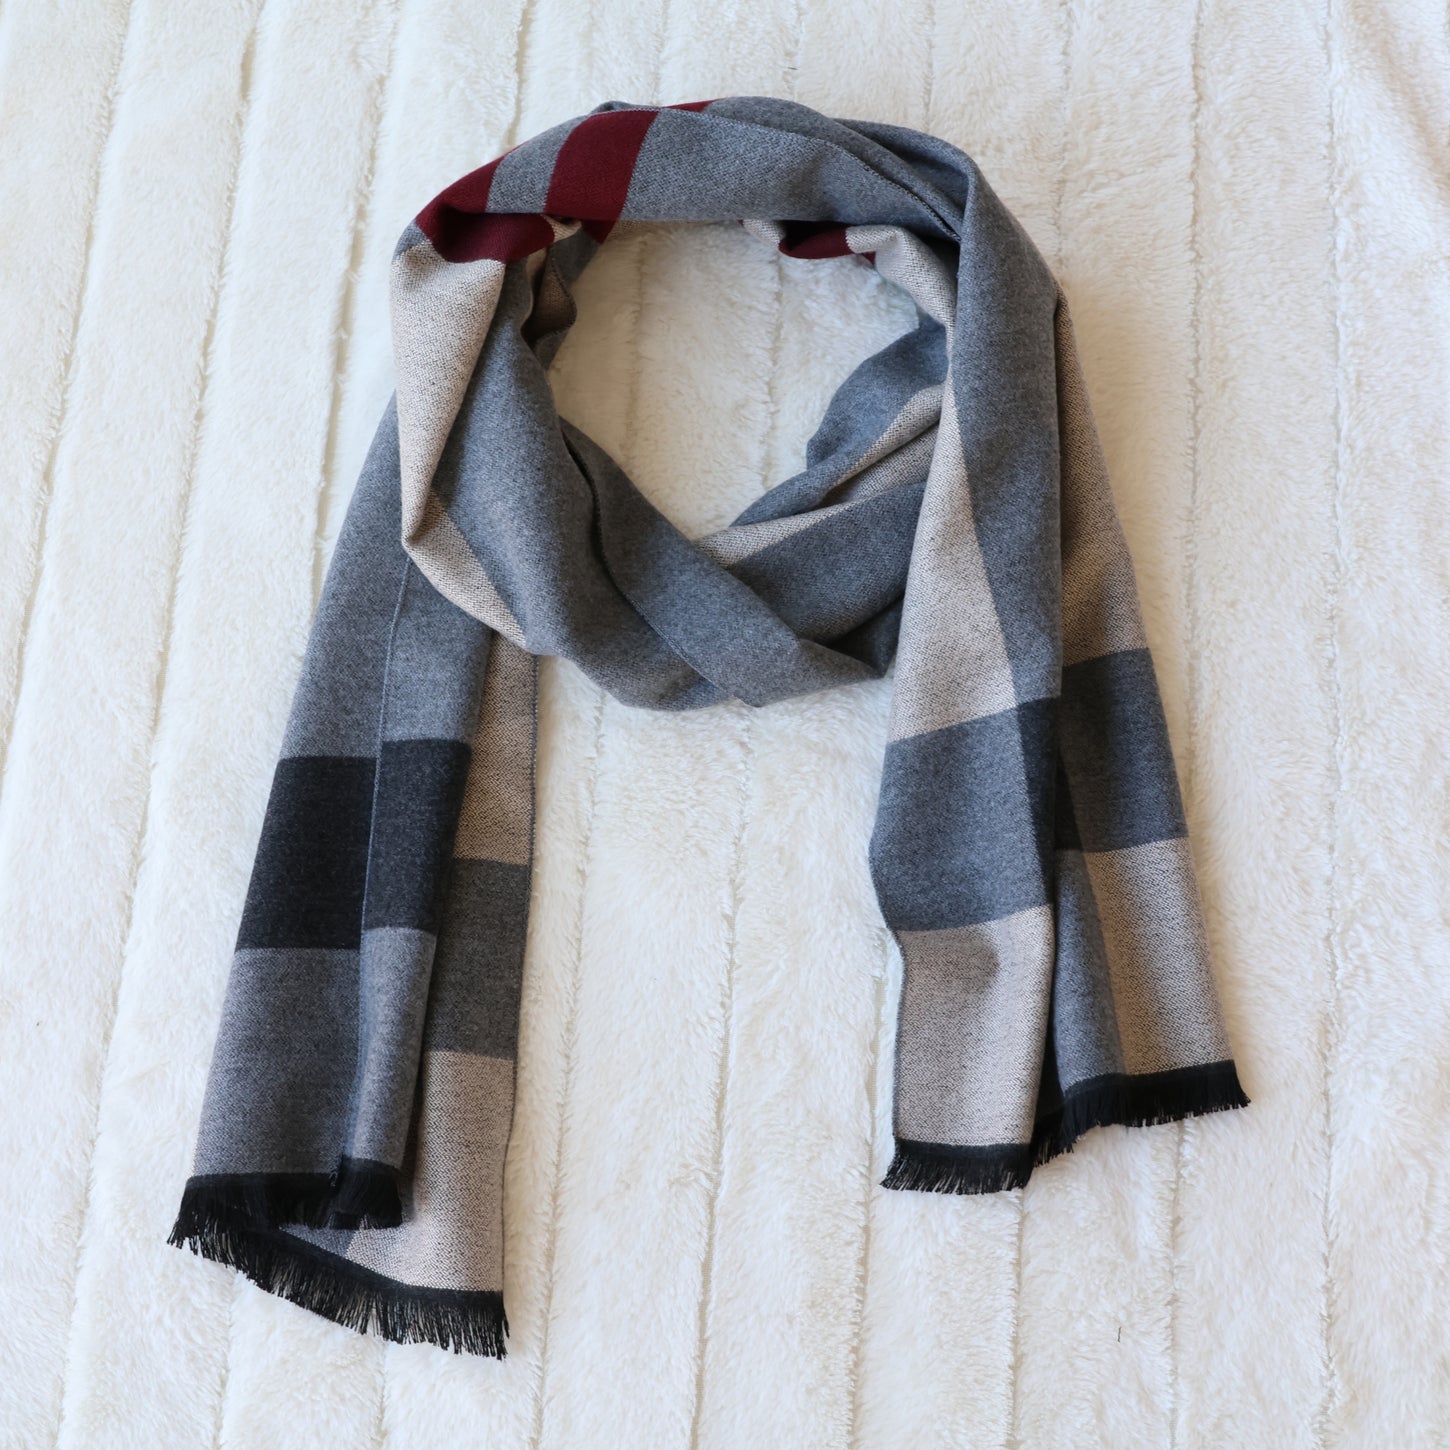 gray colorblock modern men's fall fashion winter cold weather scarf